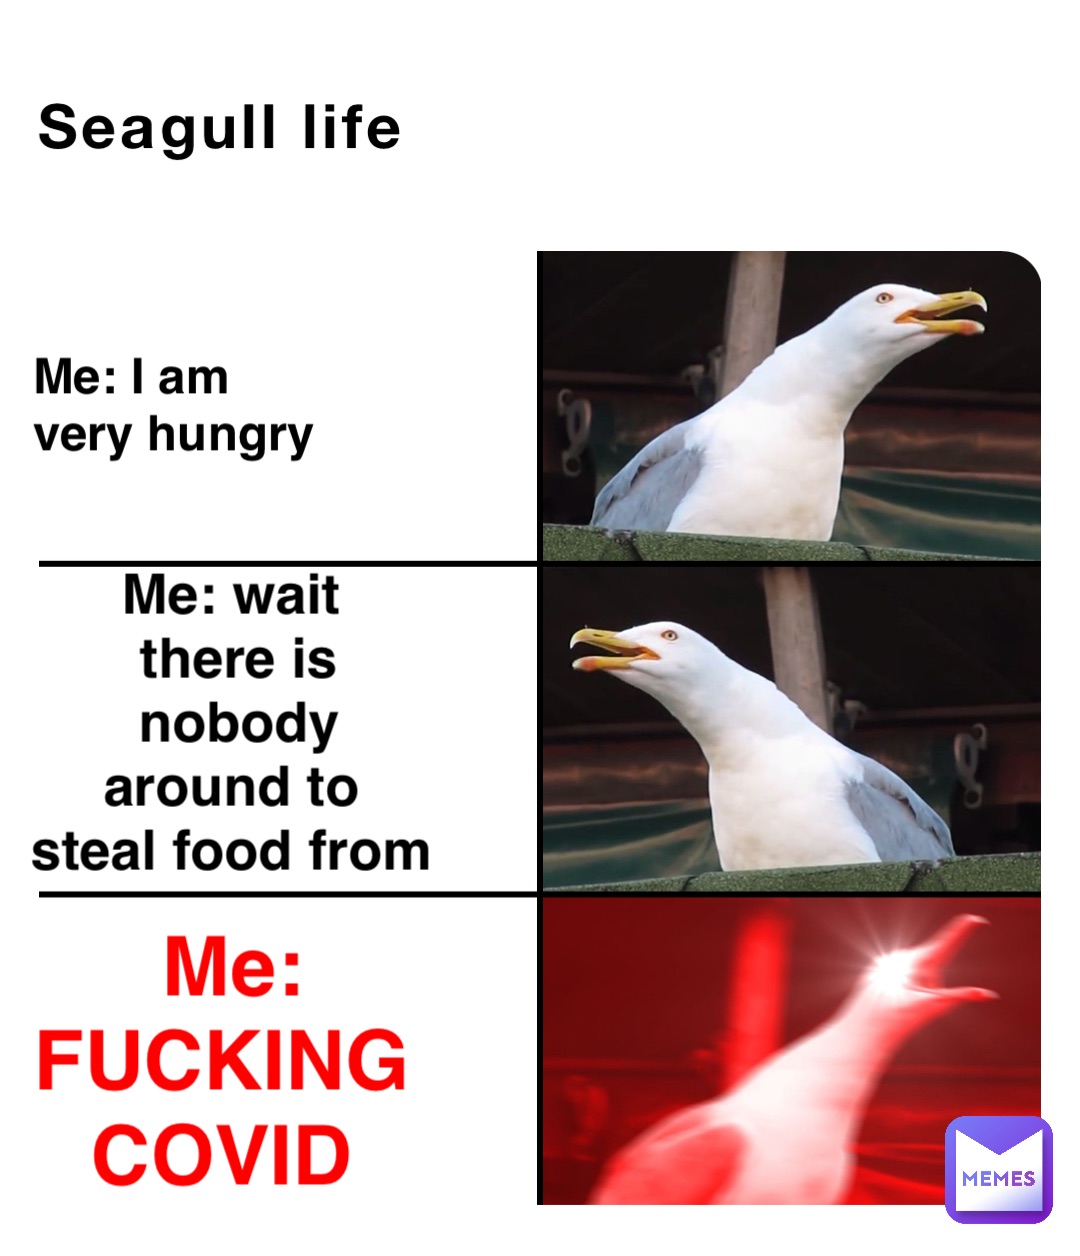 Seagull life Me: I am 
very hungry Me: wait
there is 
nobody around to
steal food from Me: 
FUCKING 
COVID